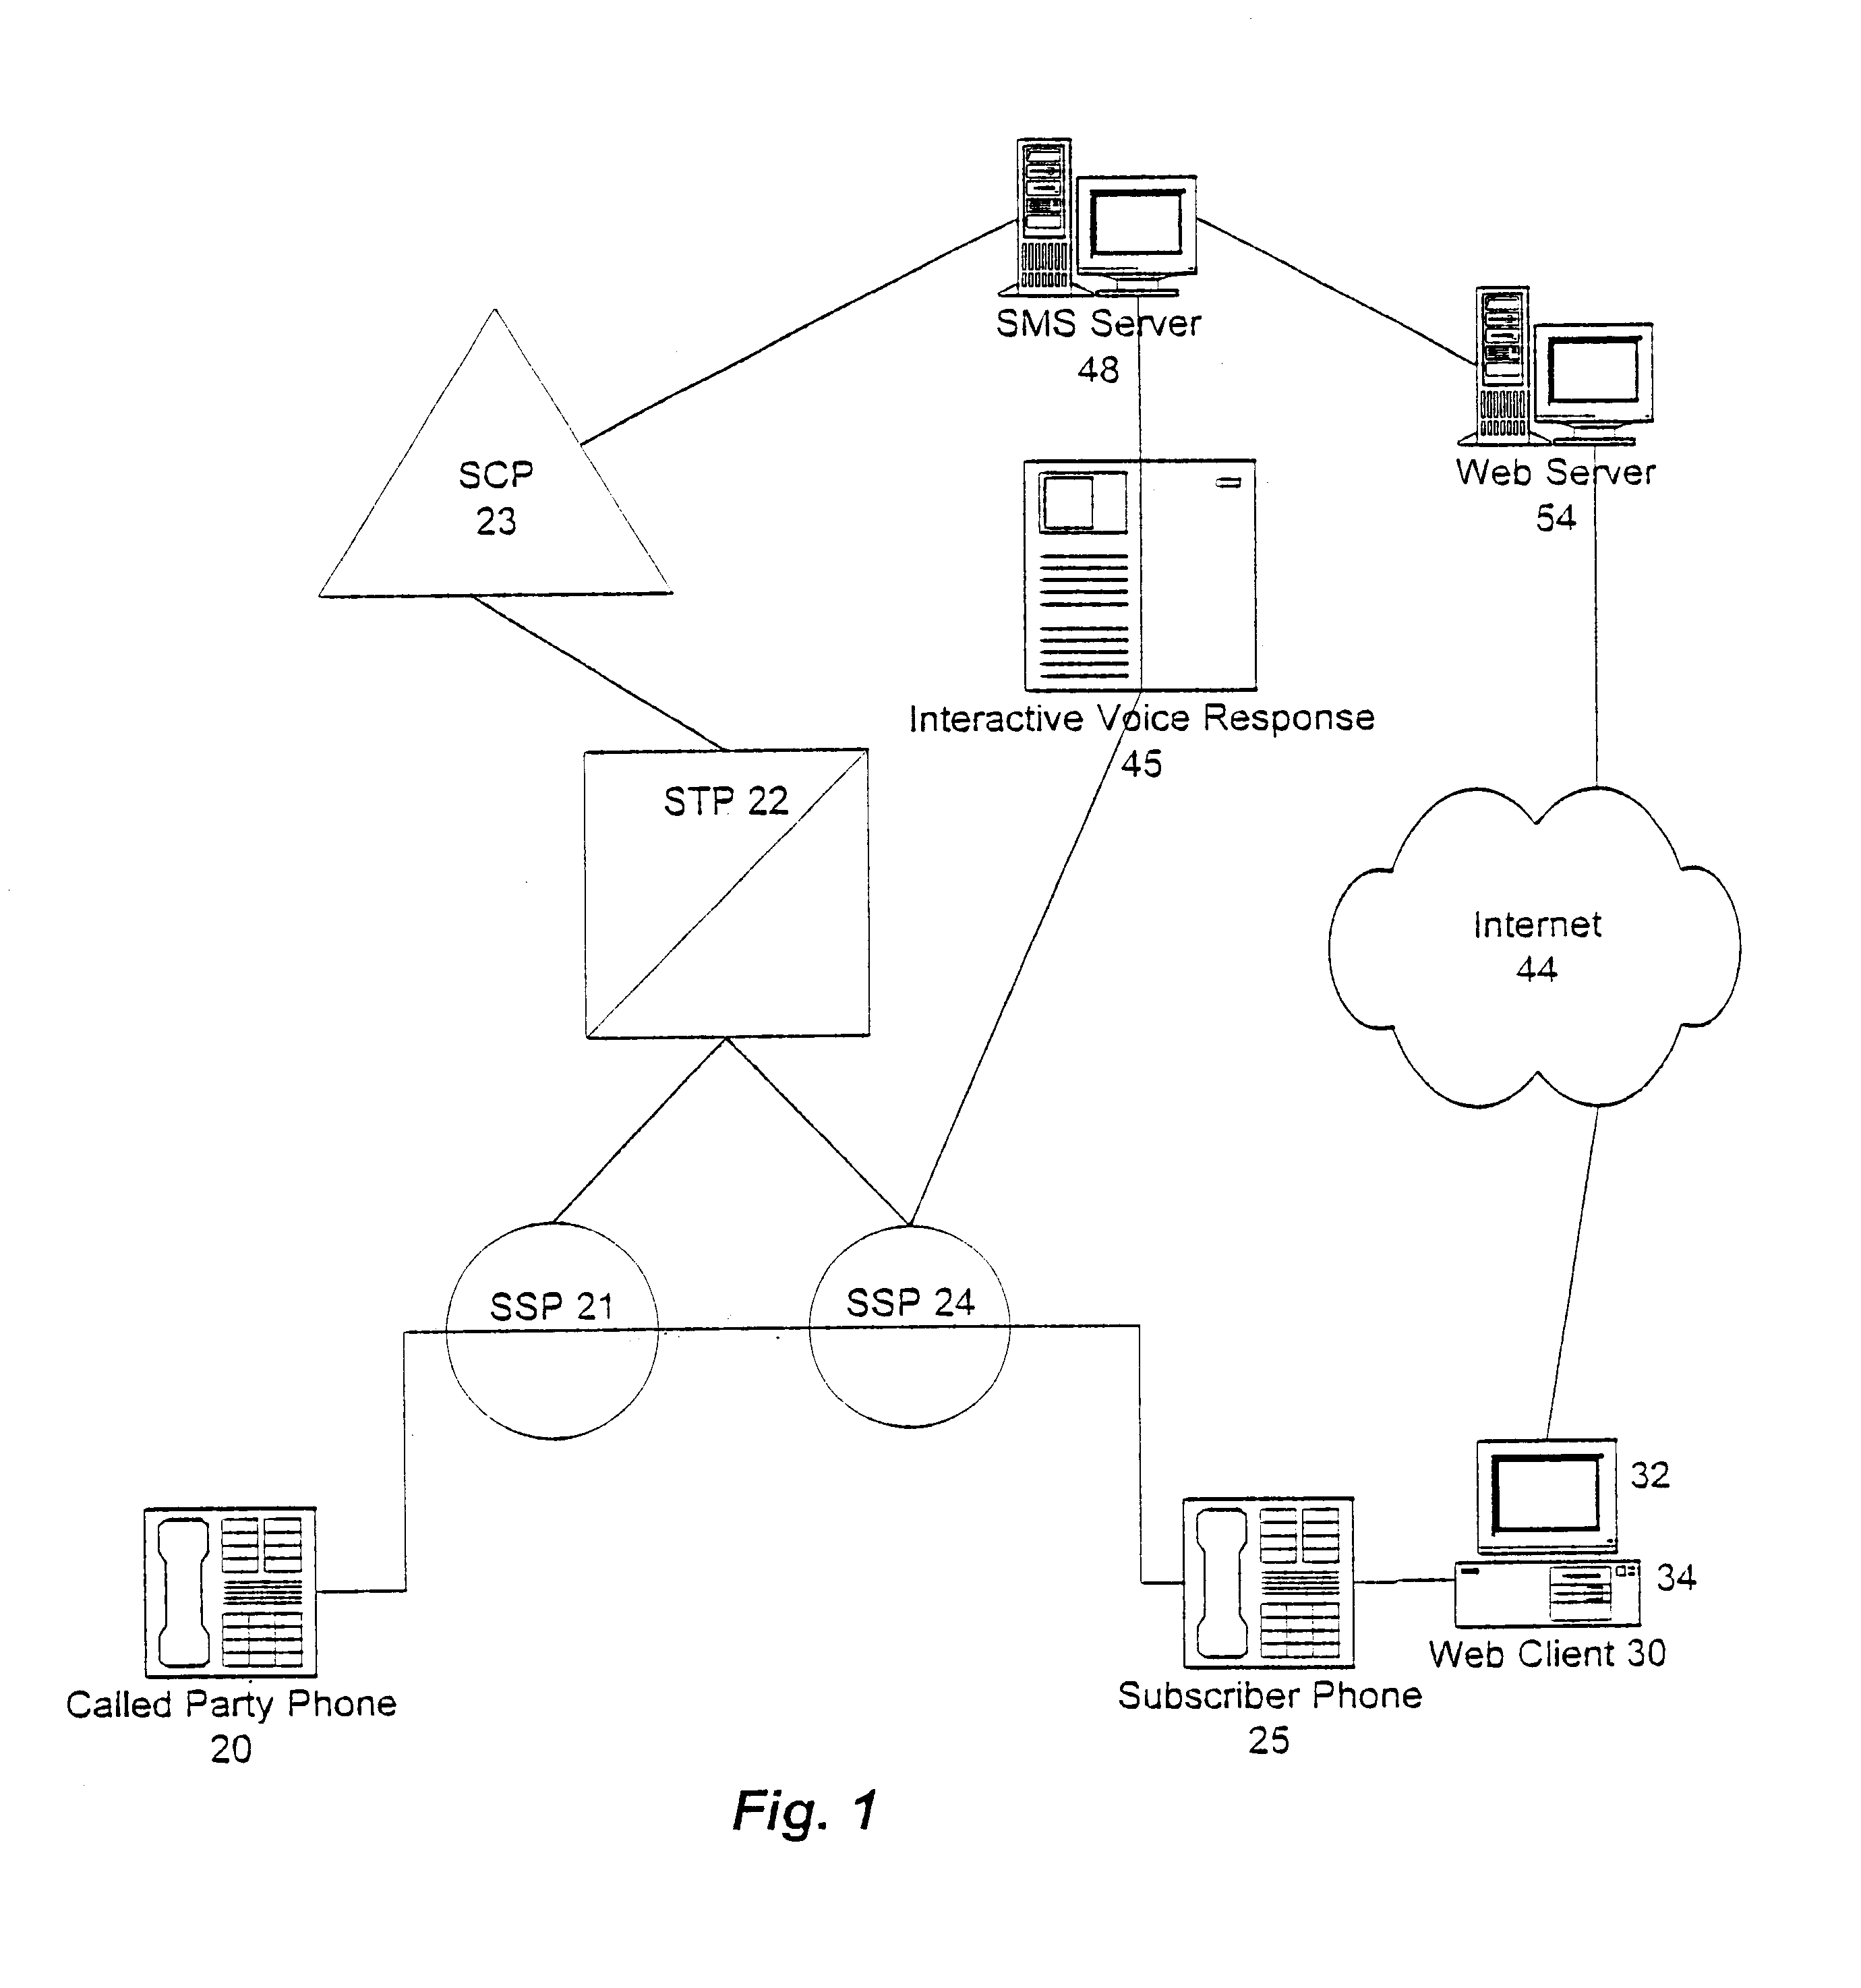 System and method for generating call records based on account codes